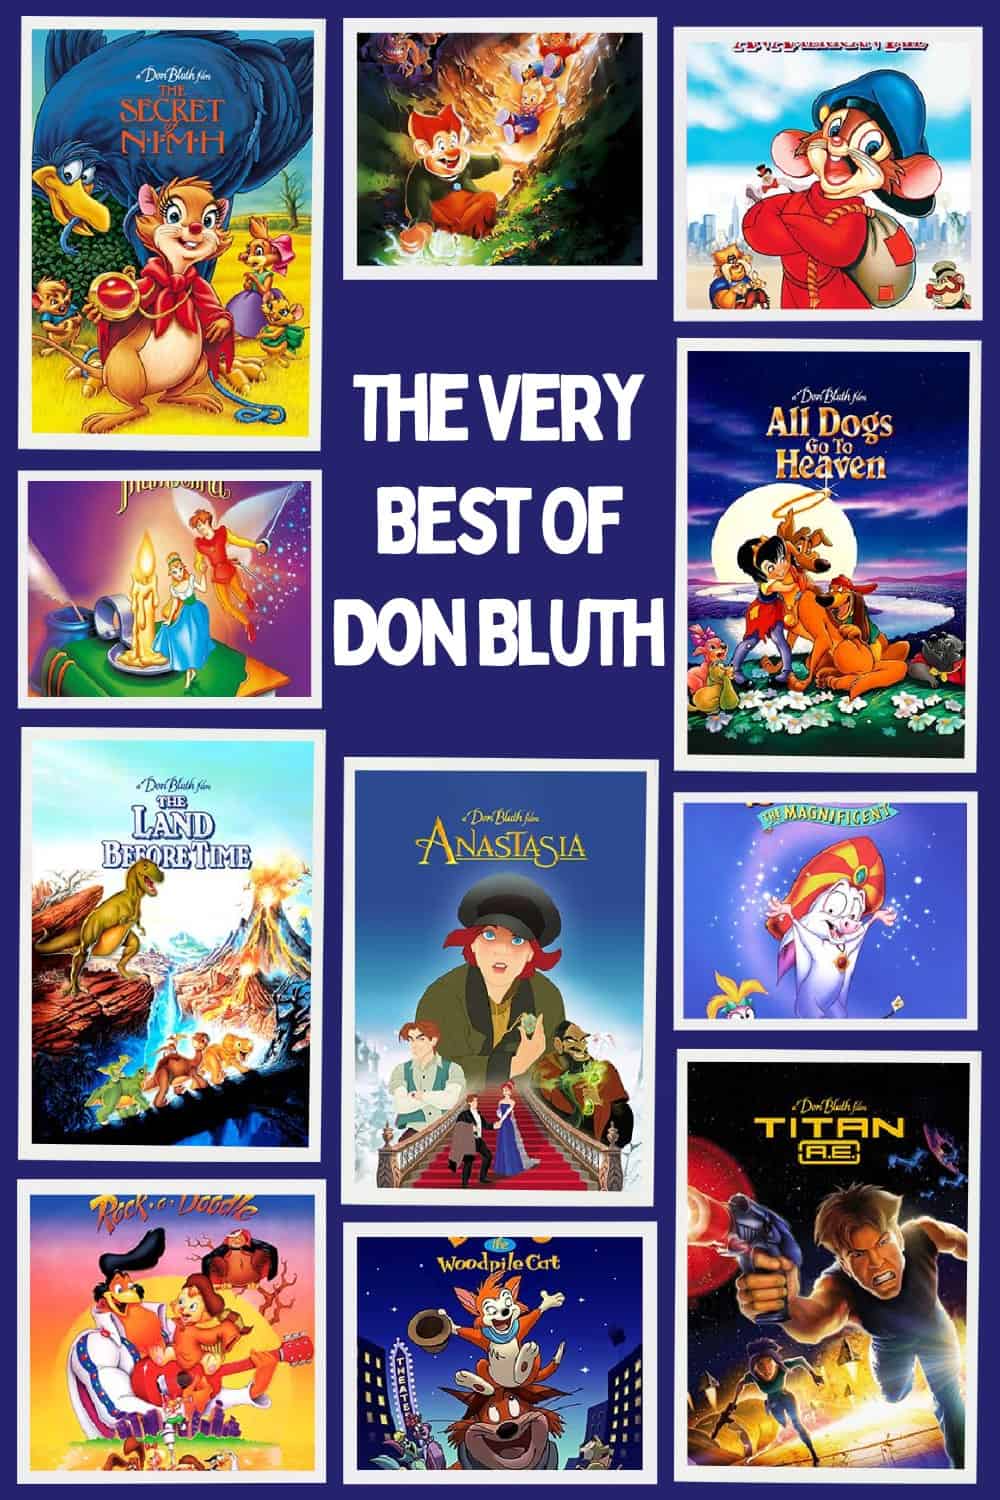 List of Best Don Bluth Movies